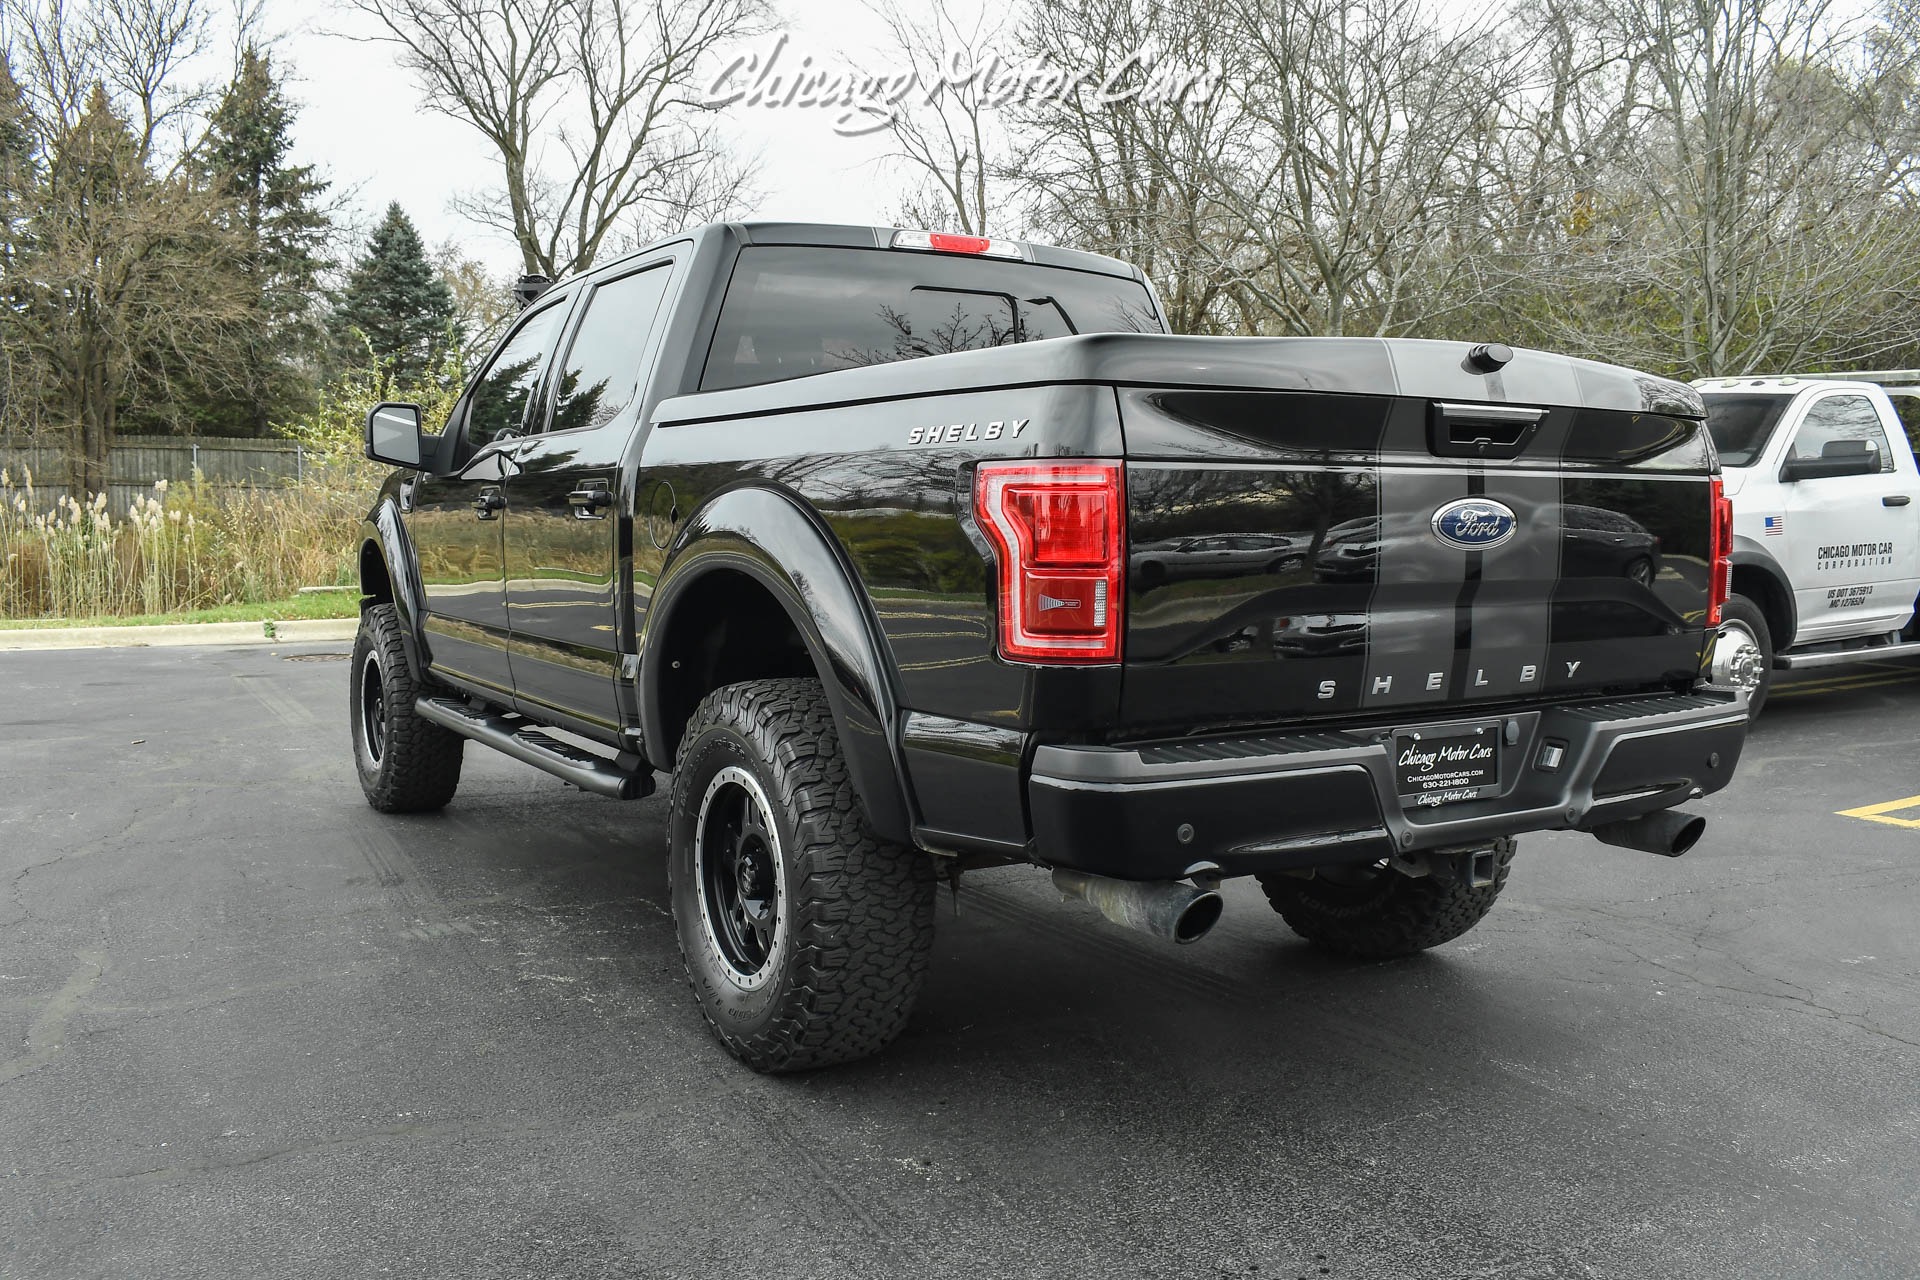 Used-2016-Ford-F-150-Lariat-Shelby-4X4-Pickup-Truck-700HP-Off-road-Lightbar-Only-18k-miles